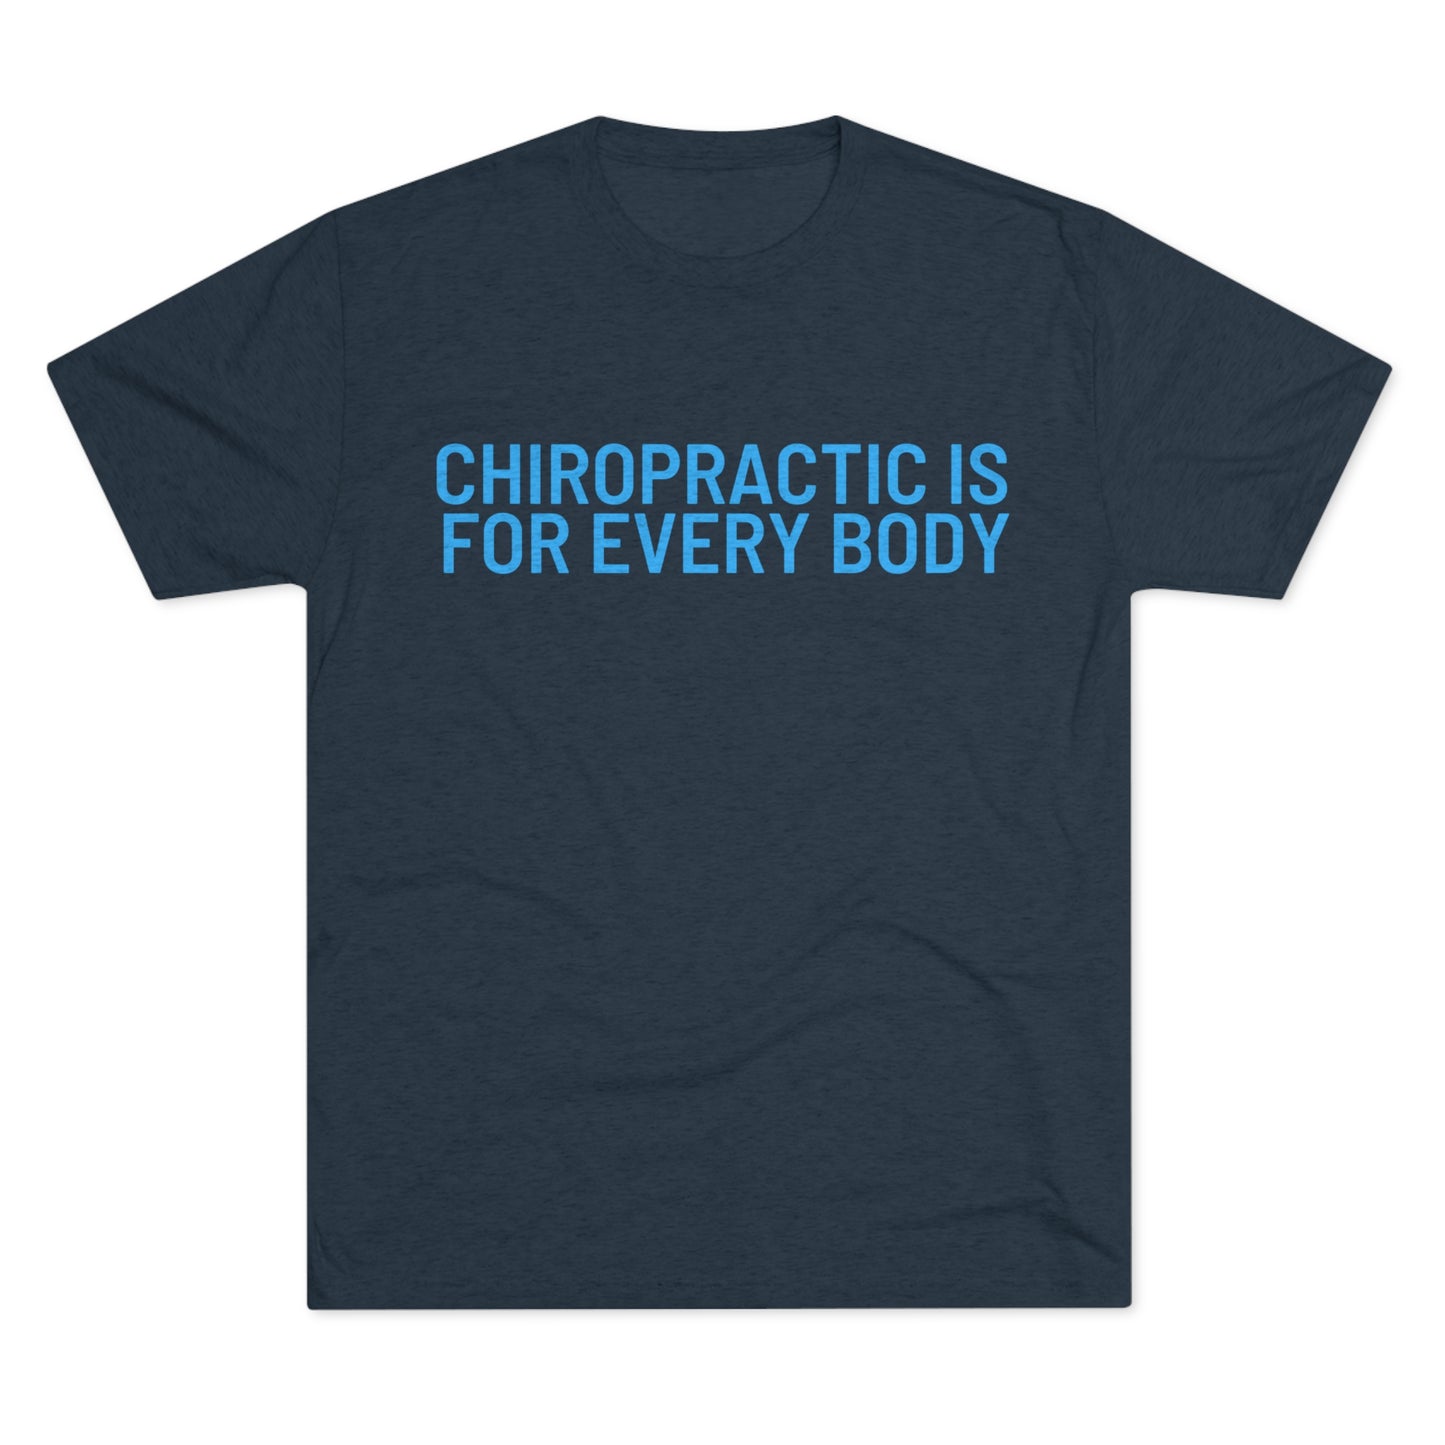 Chiropractic Is For Every Body v3 - Next Level Men's Tri-Blend Crew Tee